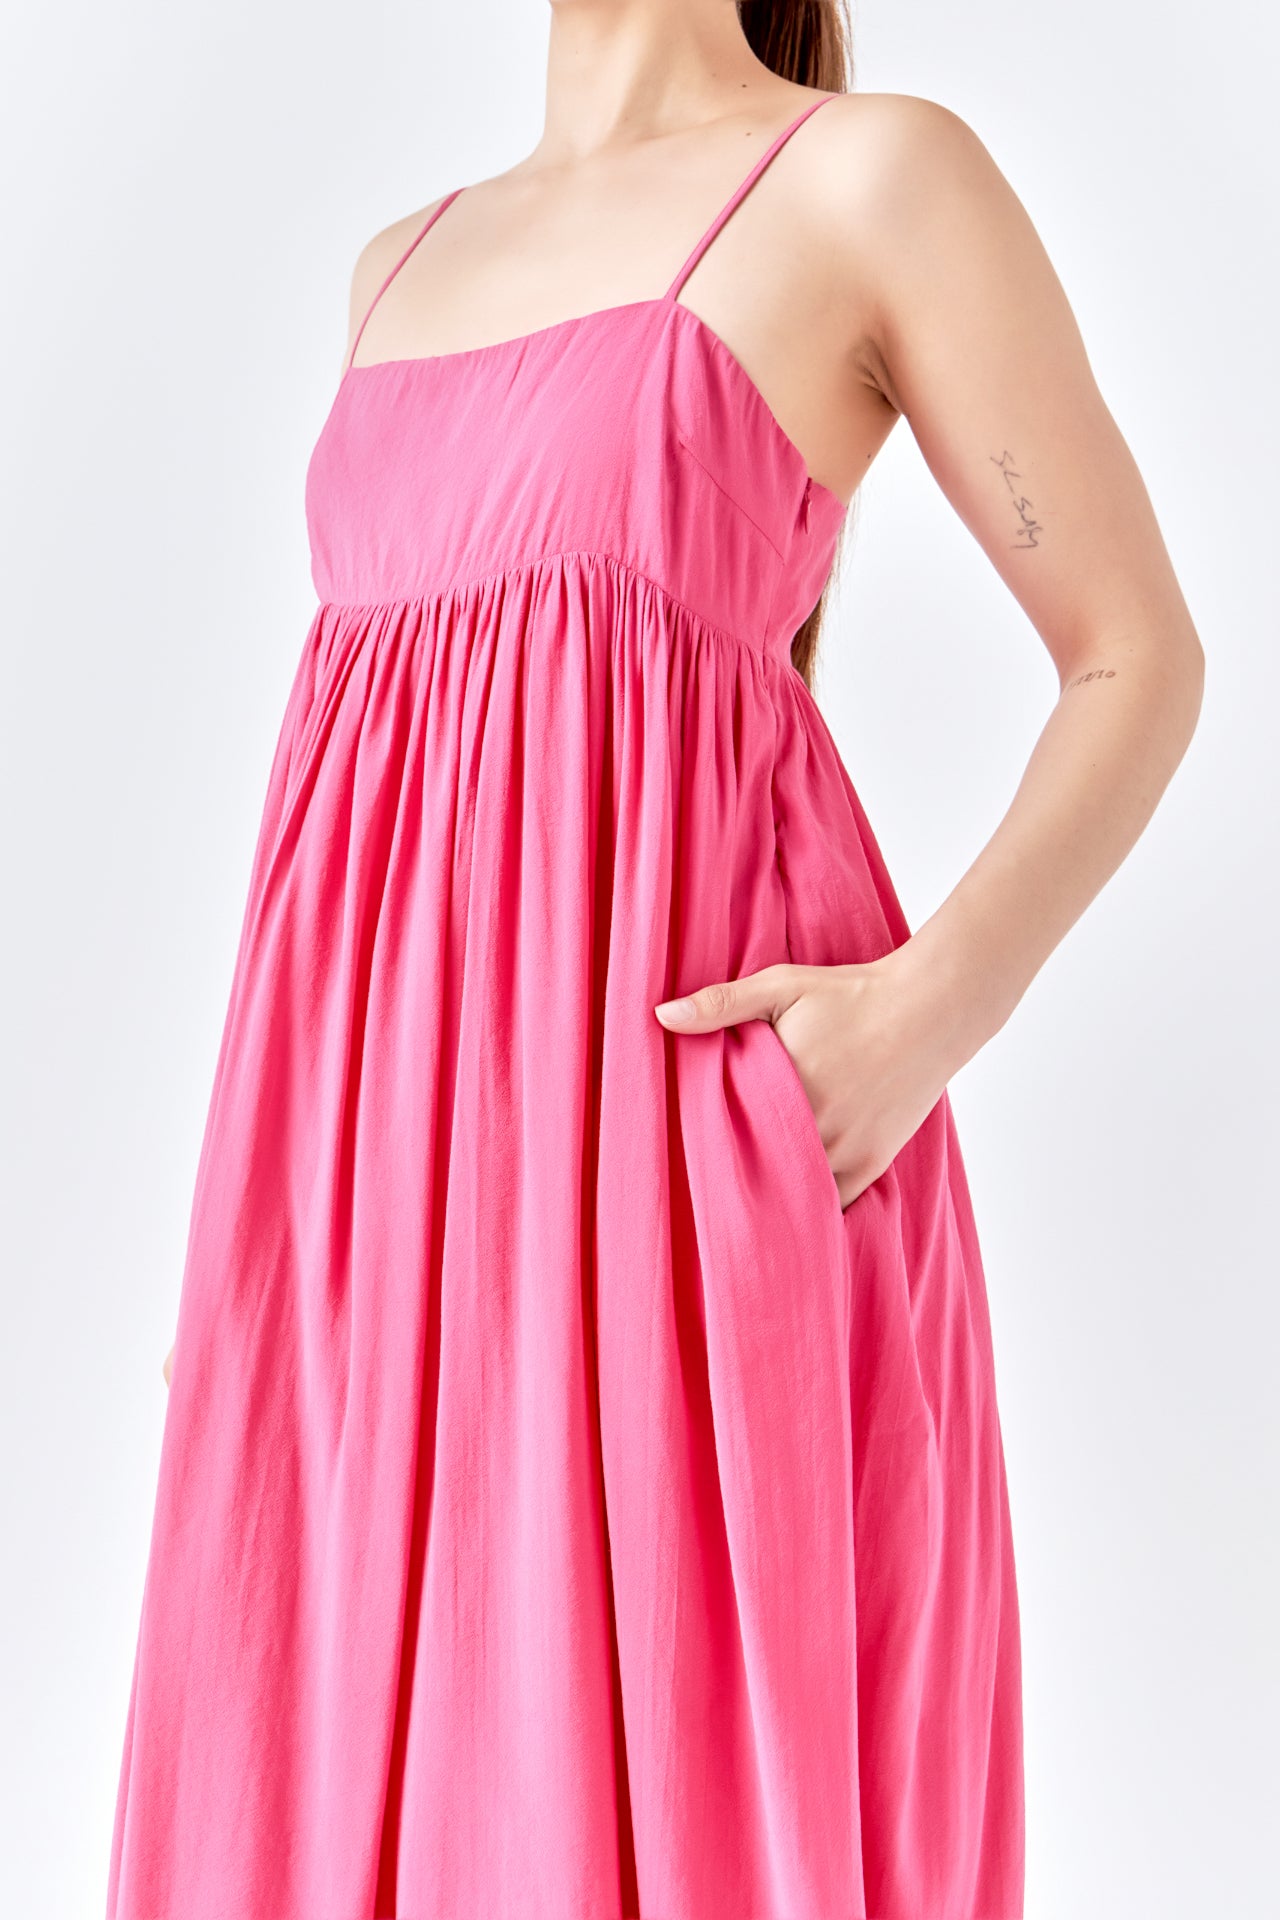 Endless Rose - Babydoll Maxi Dress - Dresses in Women's Clothing available at endlessrose.com